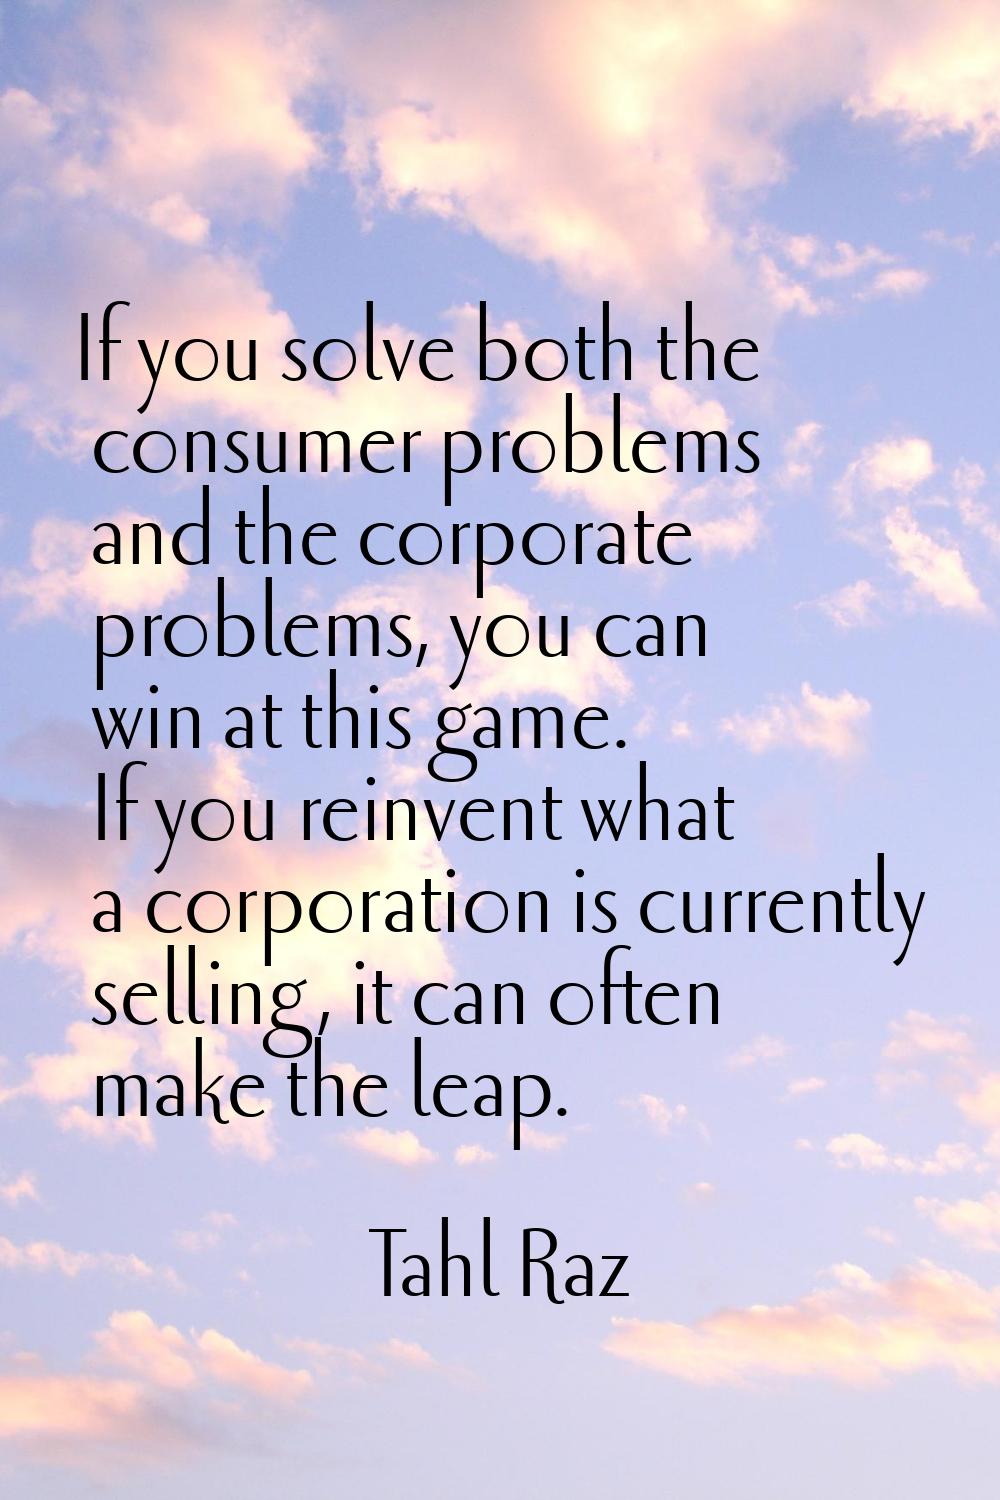 If you solve both the consumer problems and the corporate problems, you can win at this game. If yo